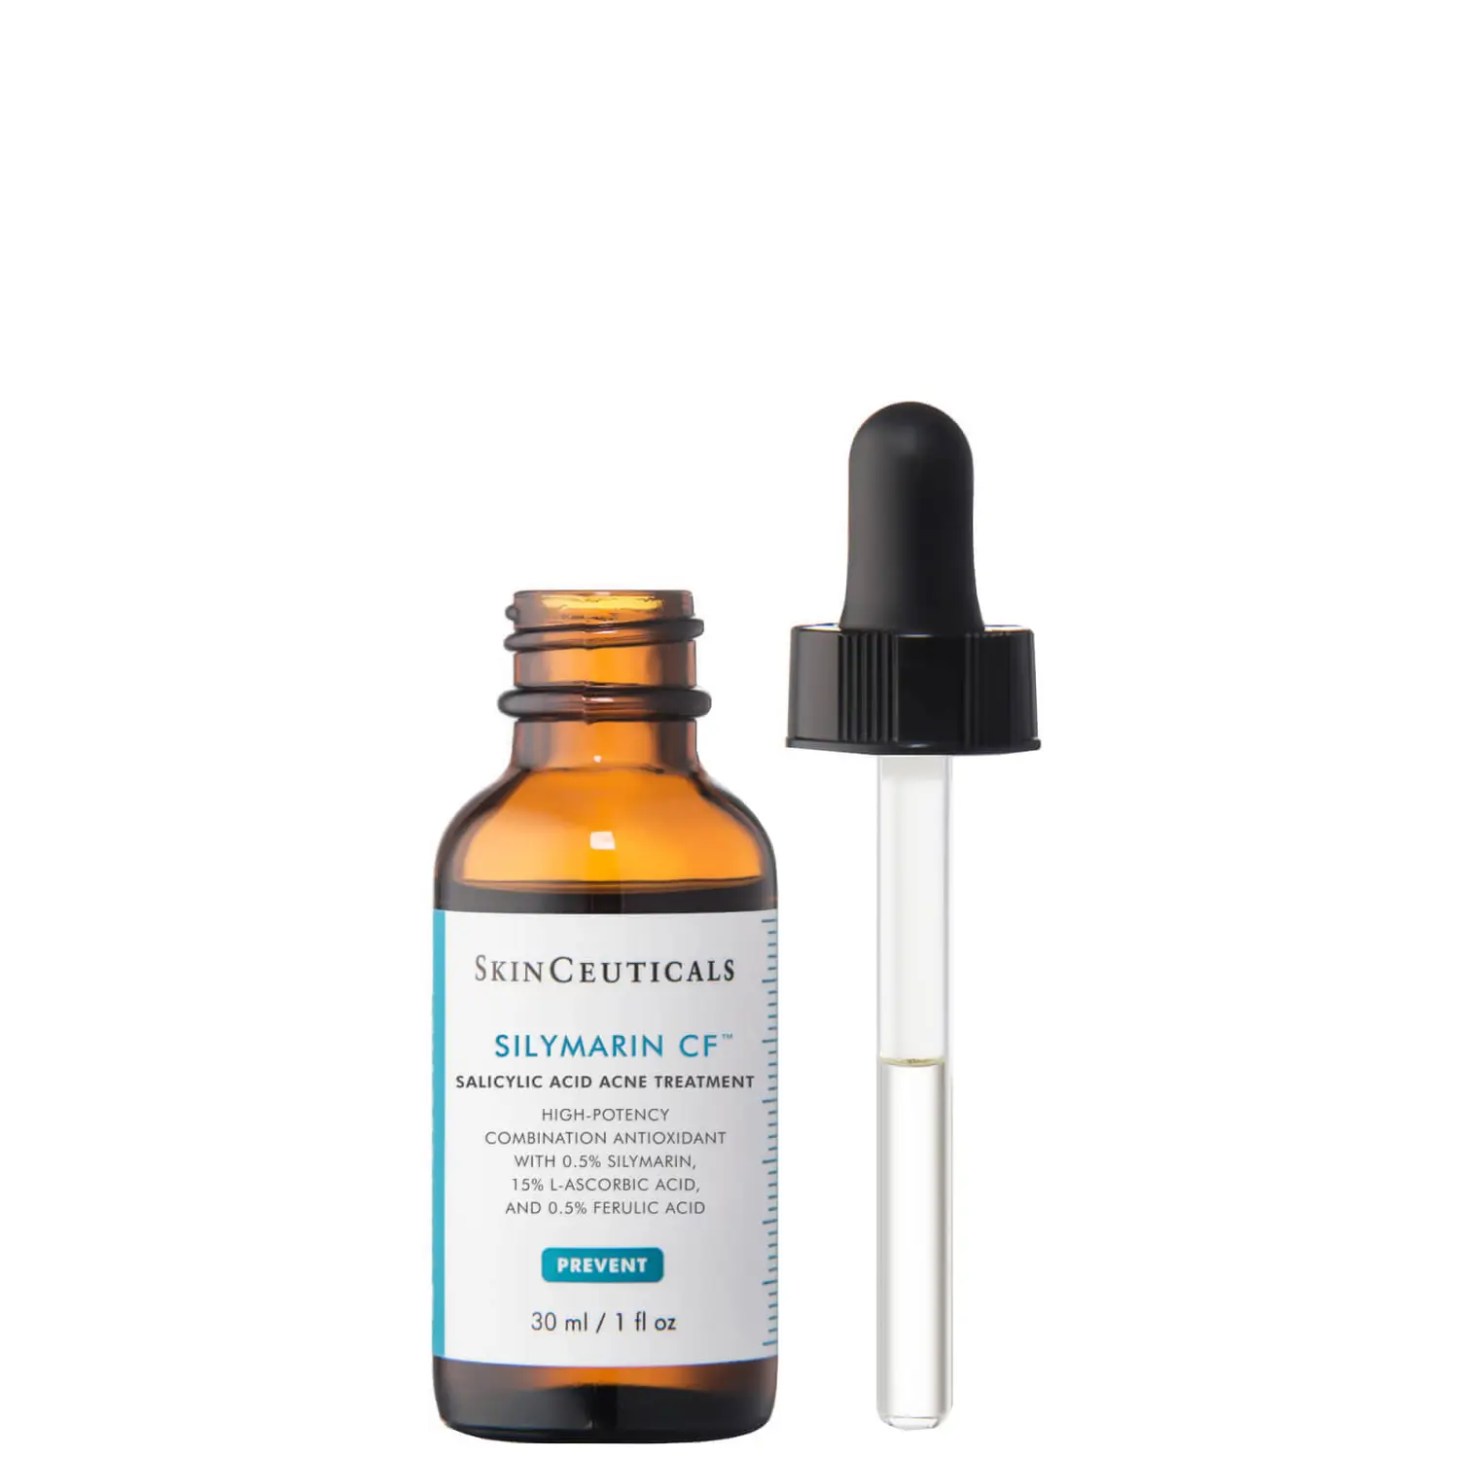 skinceuticals silymarin cf, one of the best vitamin c skincare products